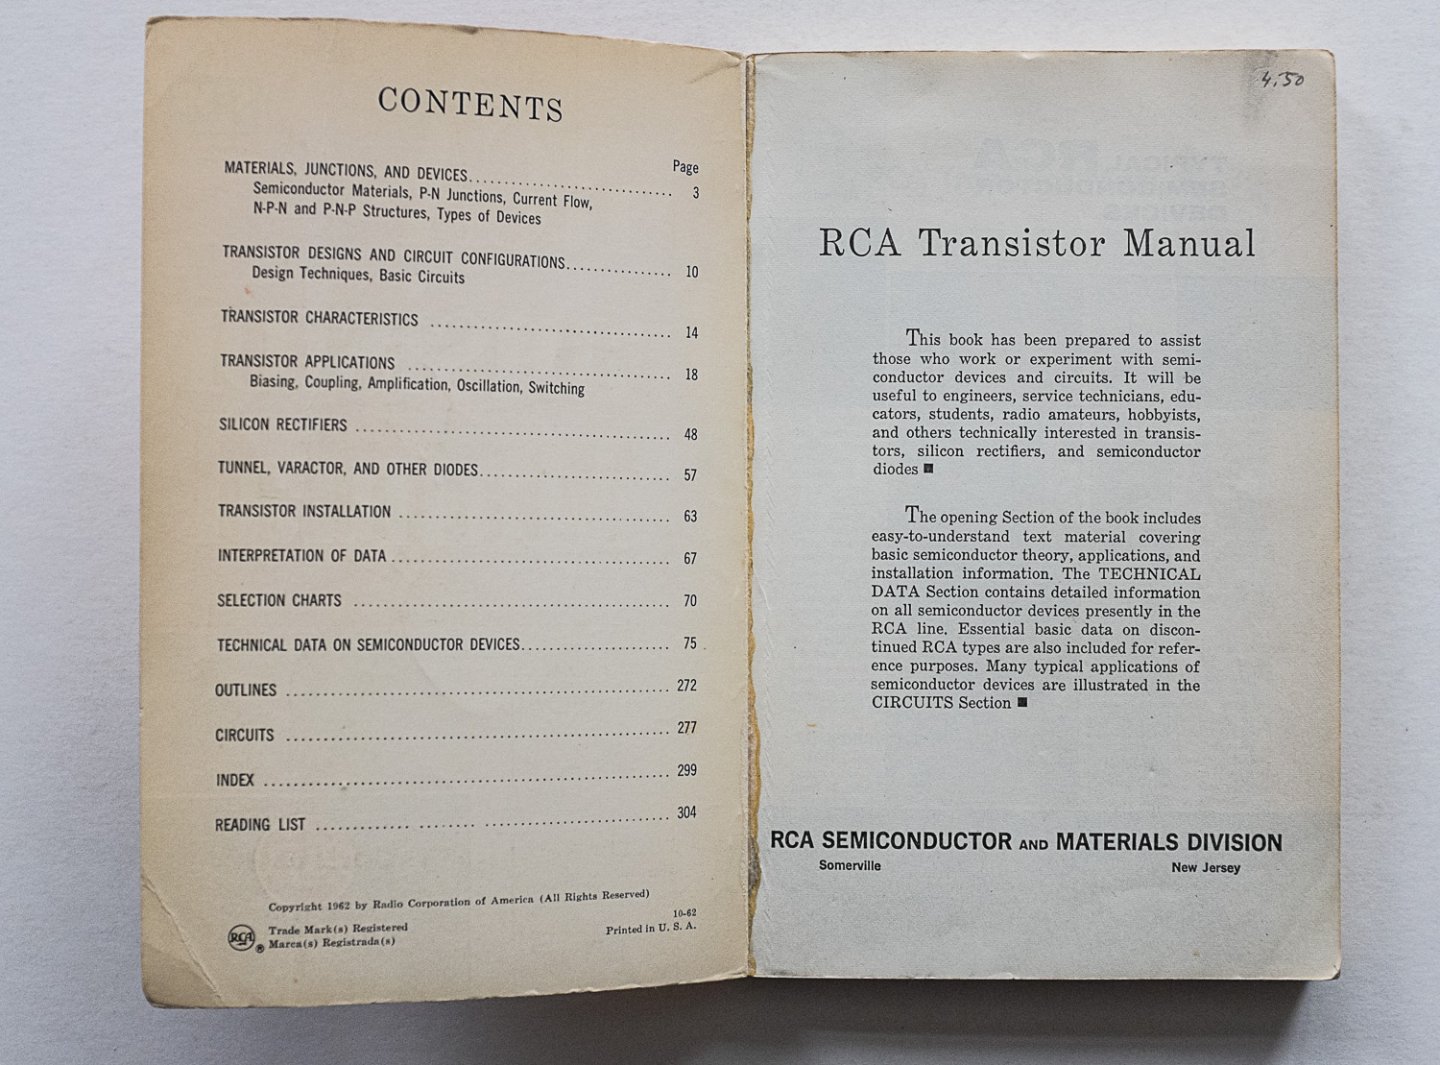 Radio Corporation of America - including Silicon Rectifiers and Diodes - RCA Transistor Manual